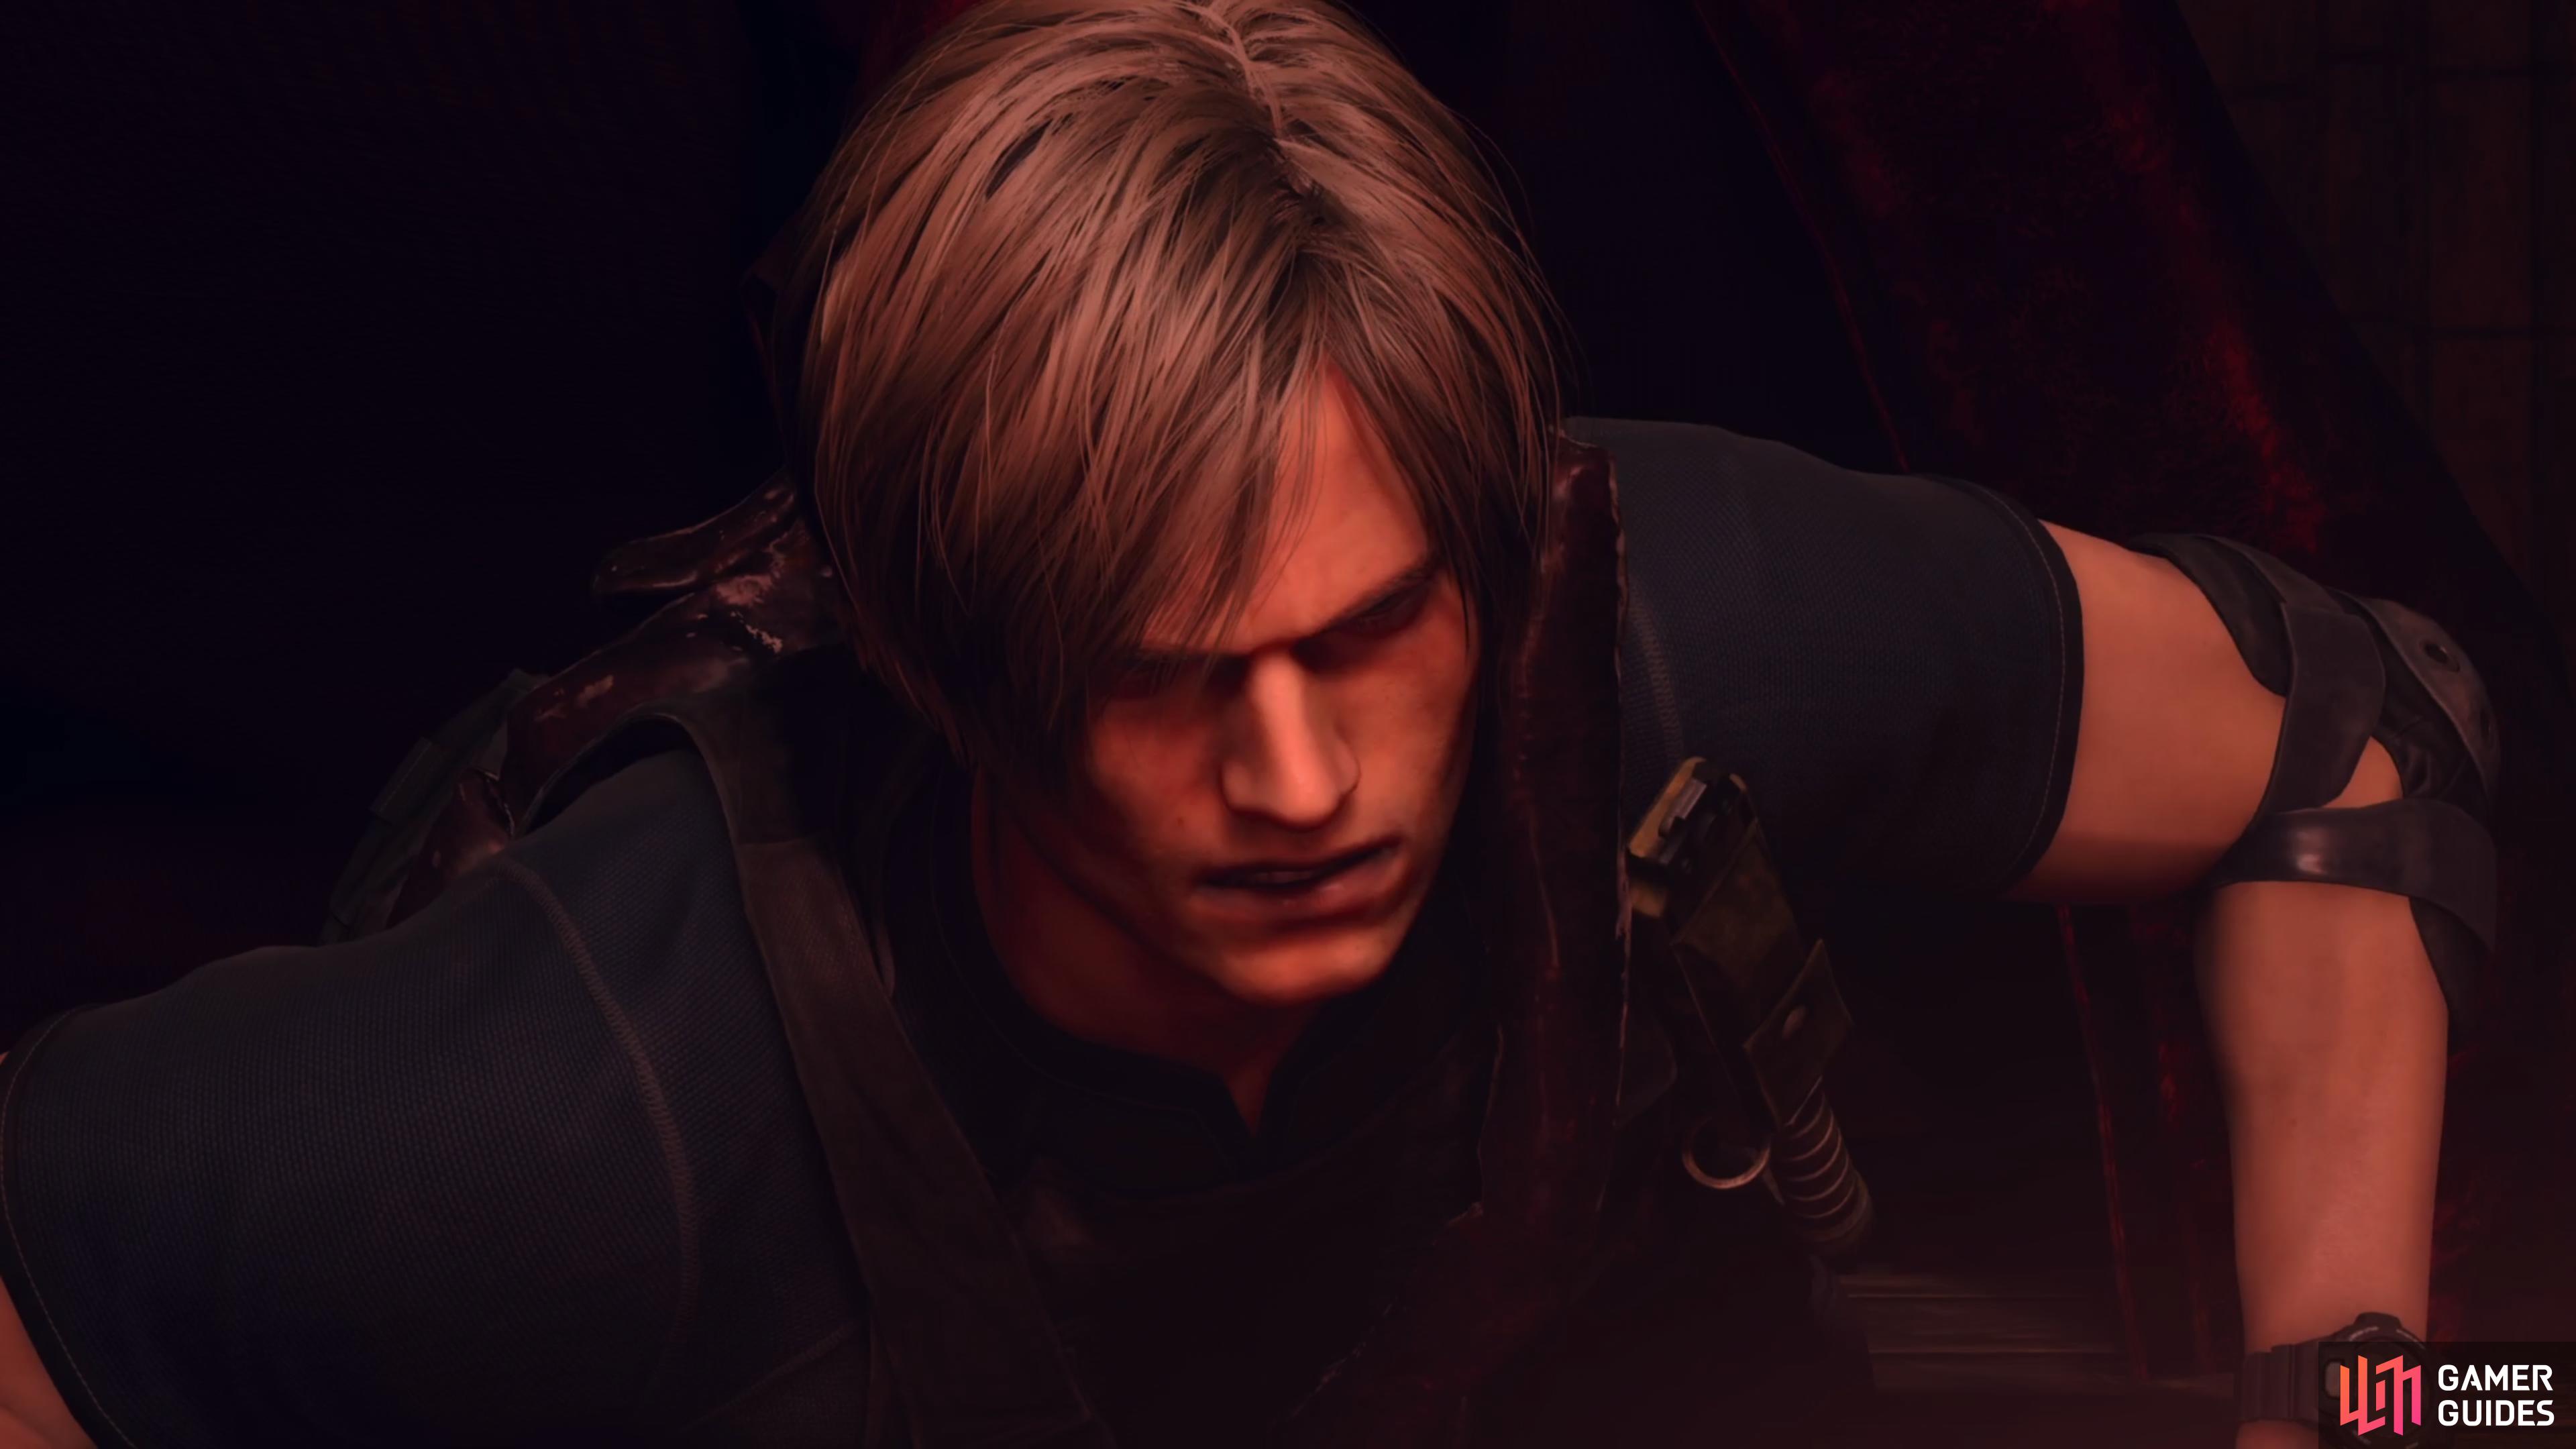 Resident Evil 4 Attaché Case: 'Gold' on Steam